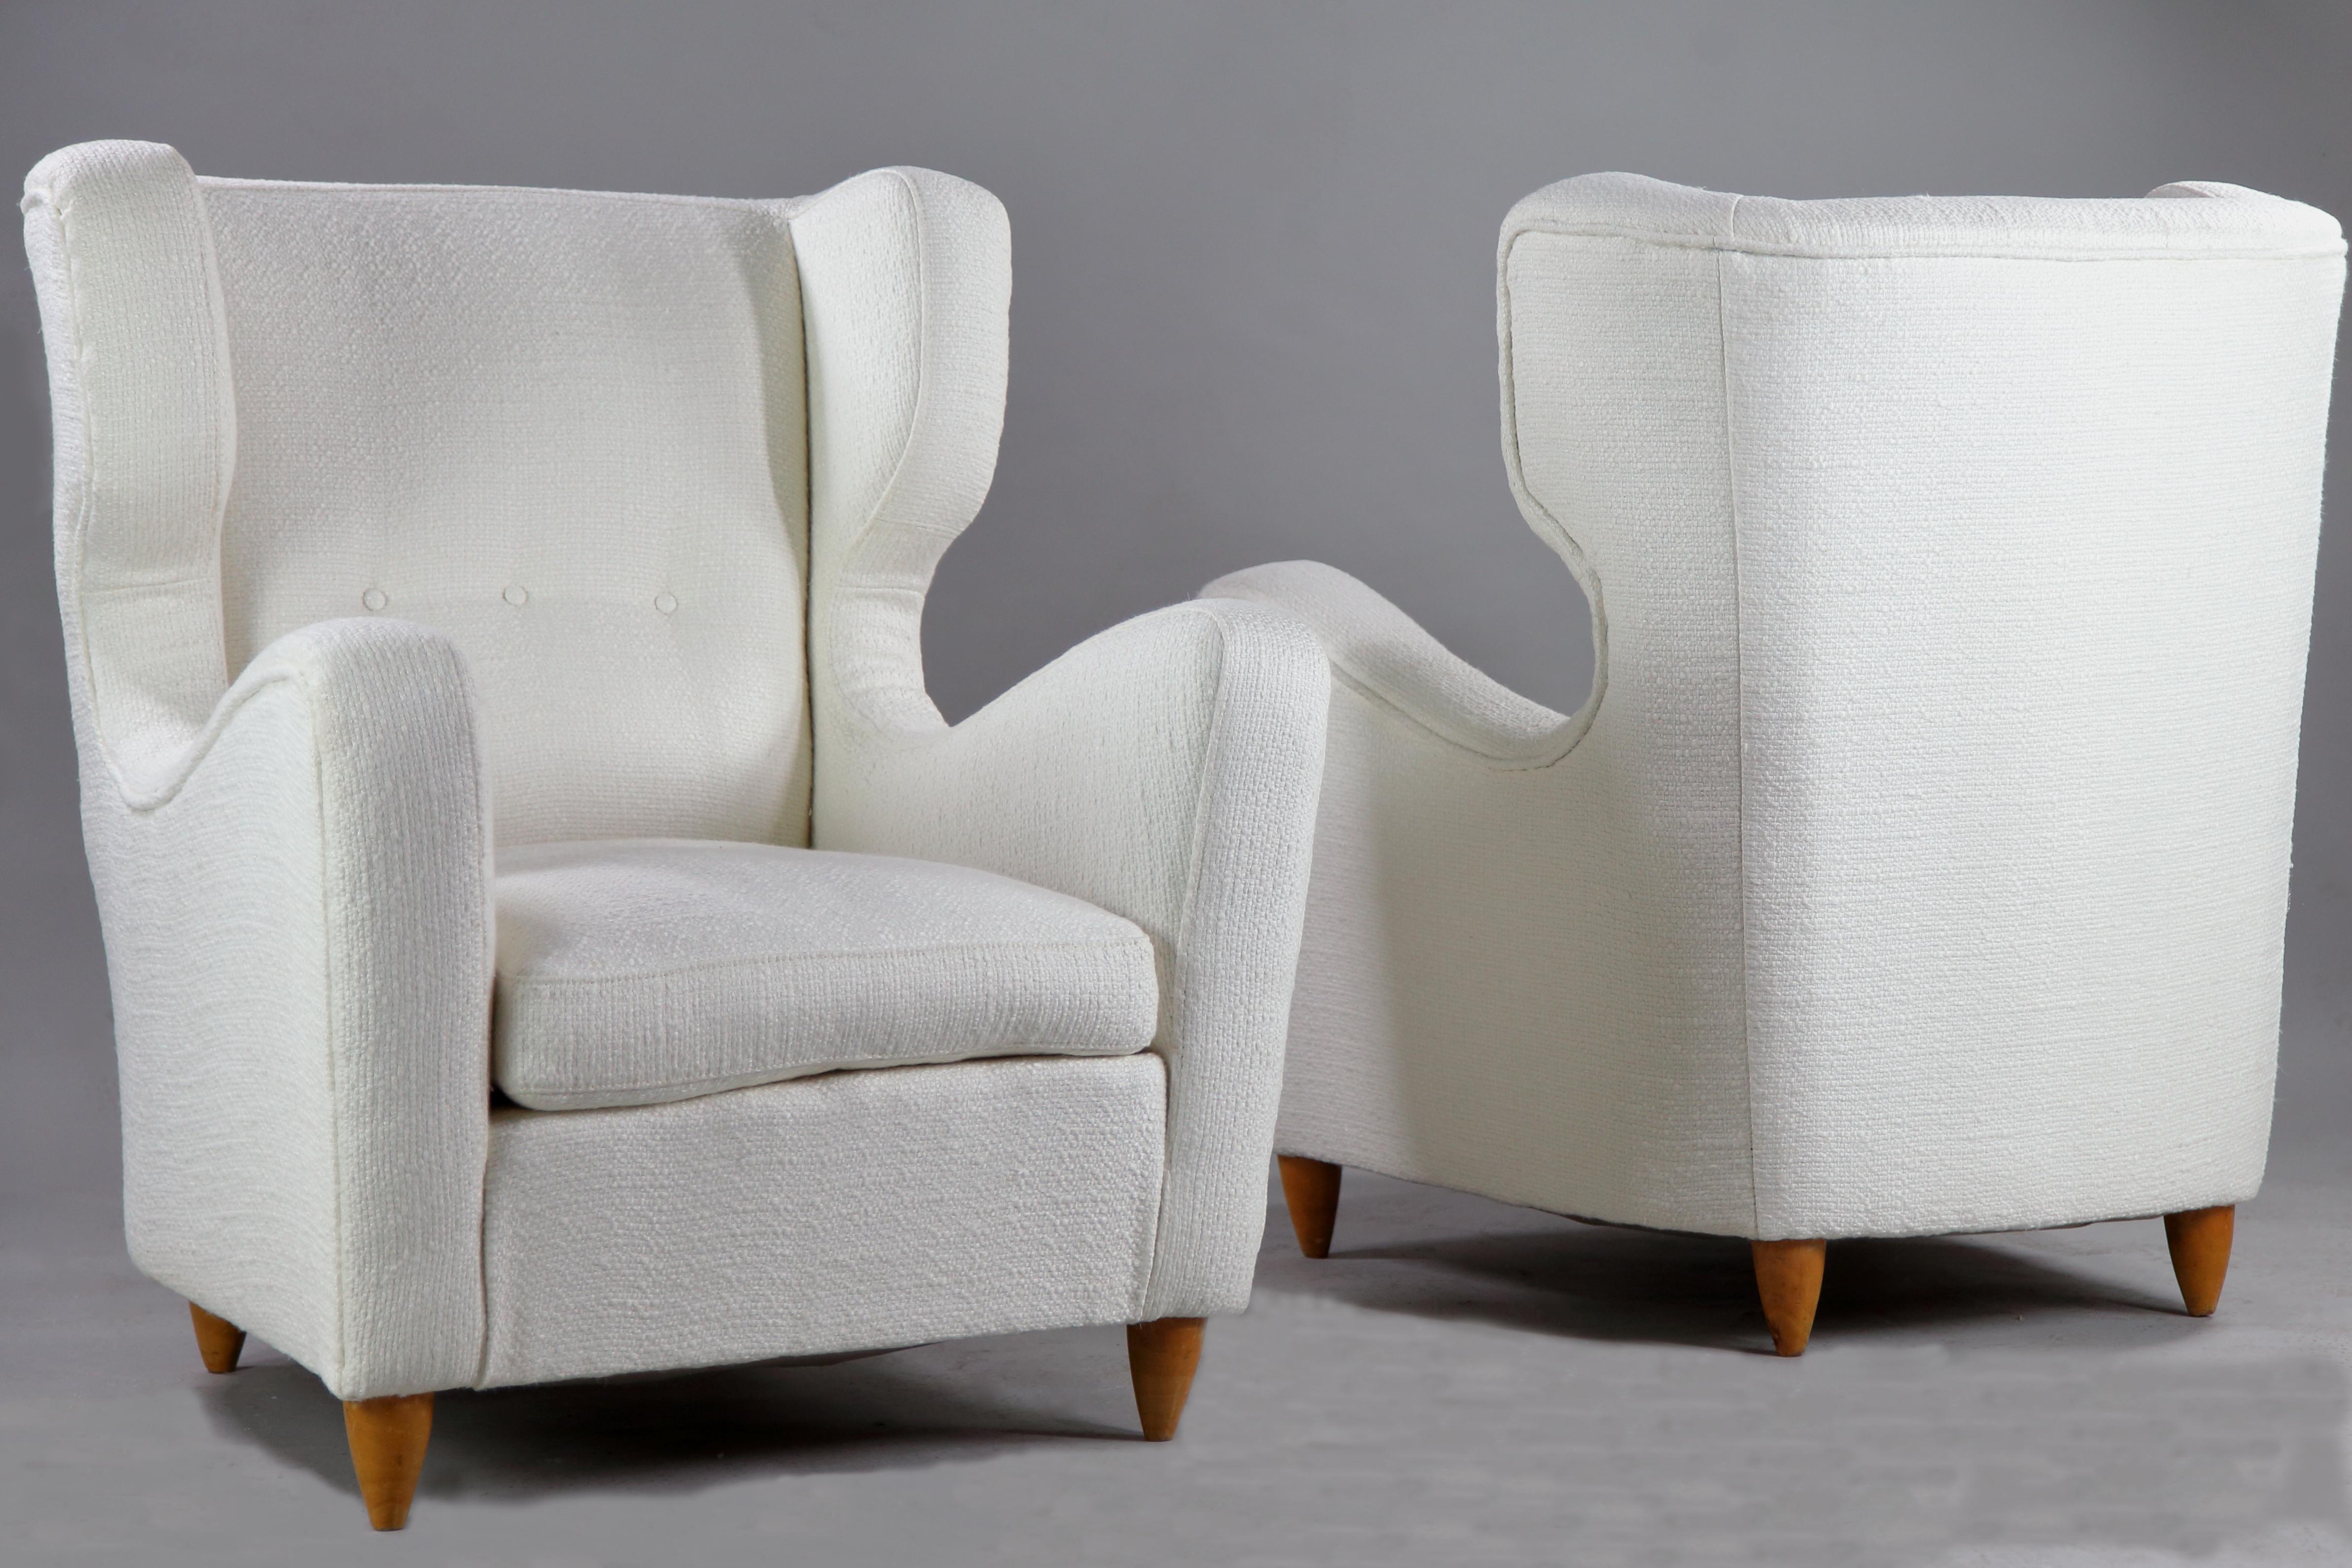 Wingback Chairs by Melchiorre Bega 1940s, Reupholstered in Metaphore Fabric For Sale 4